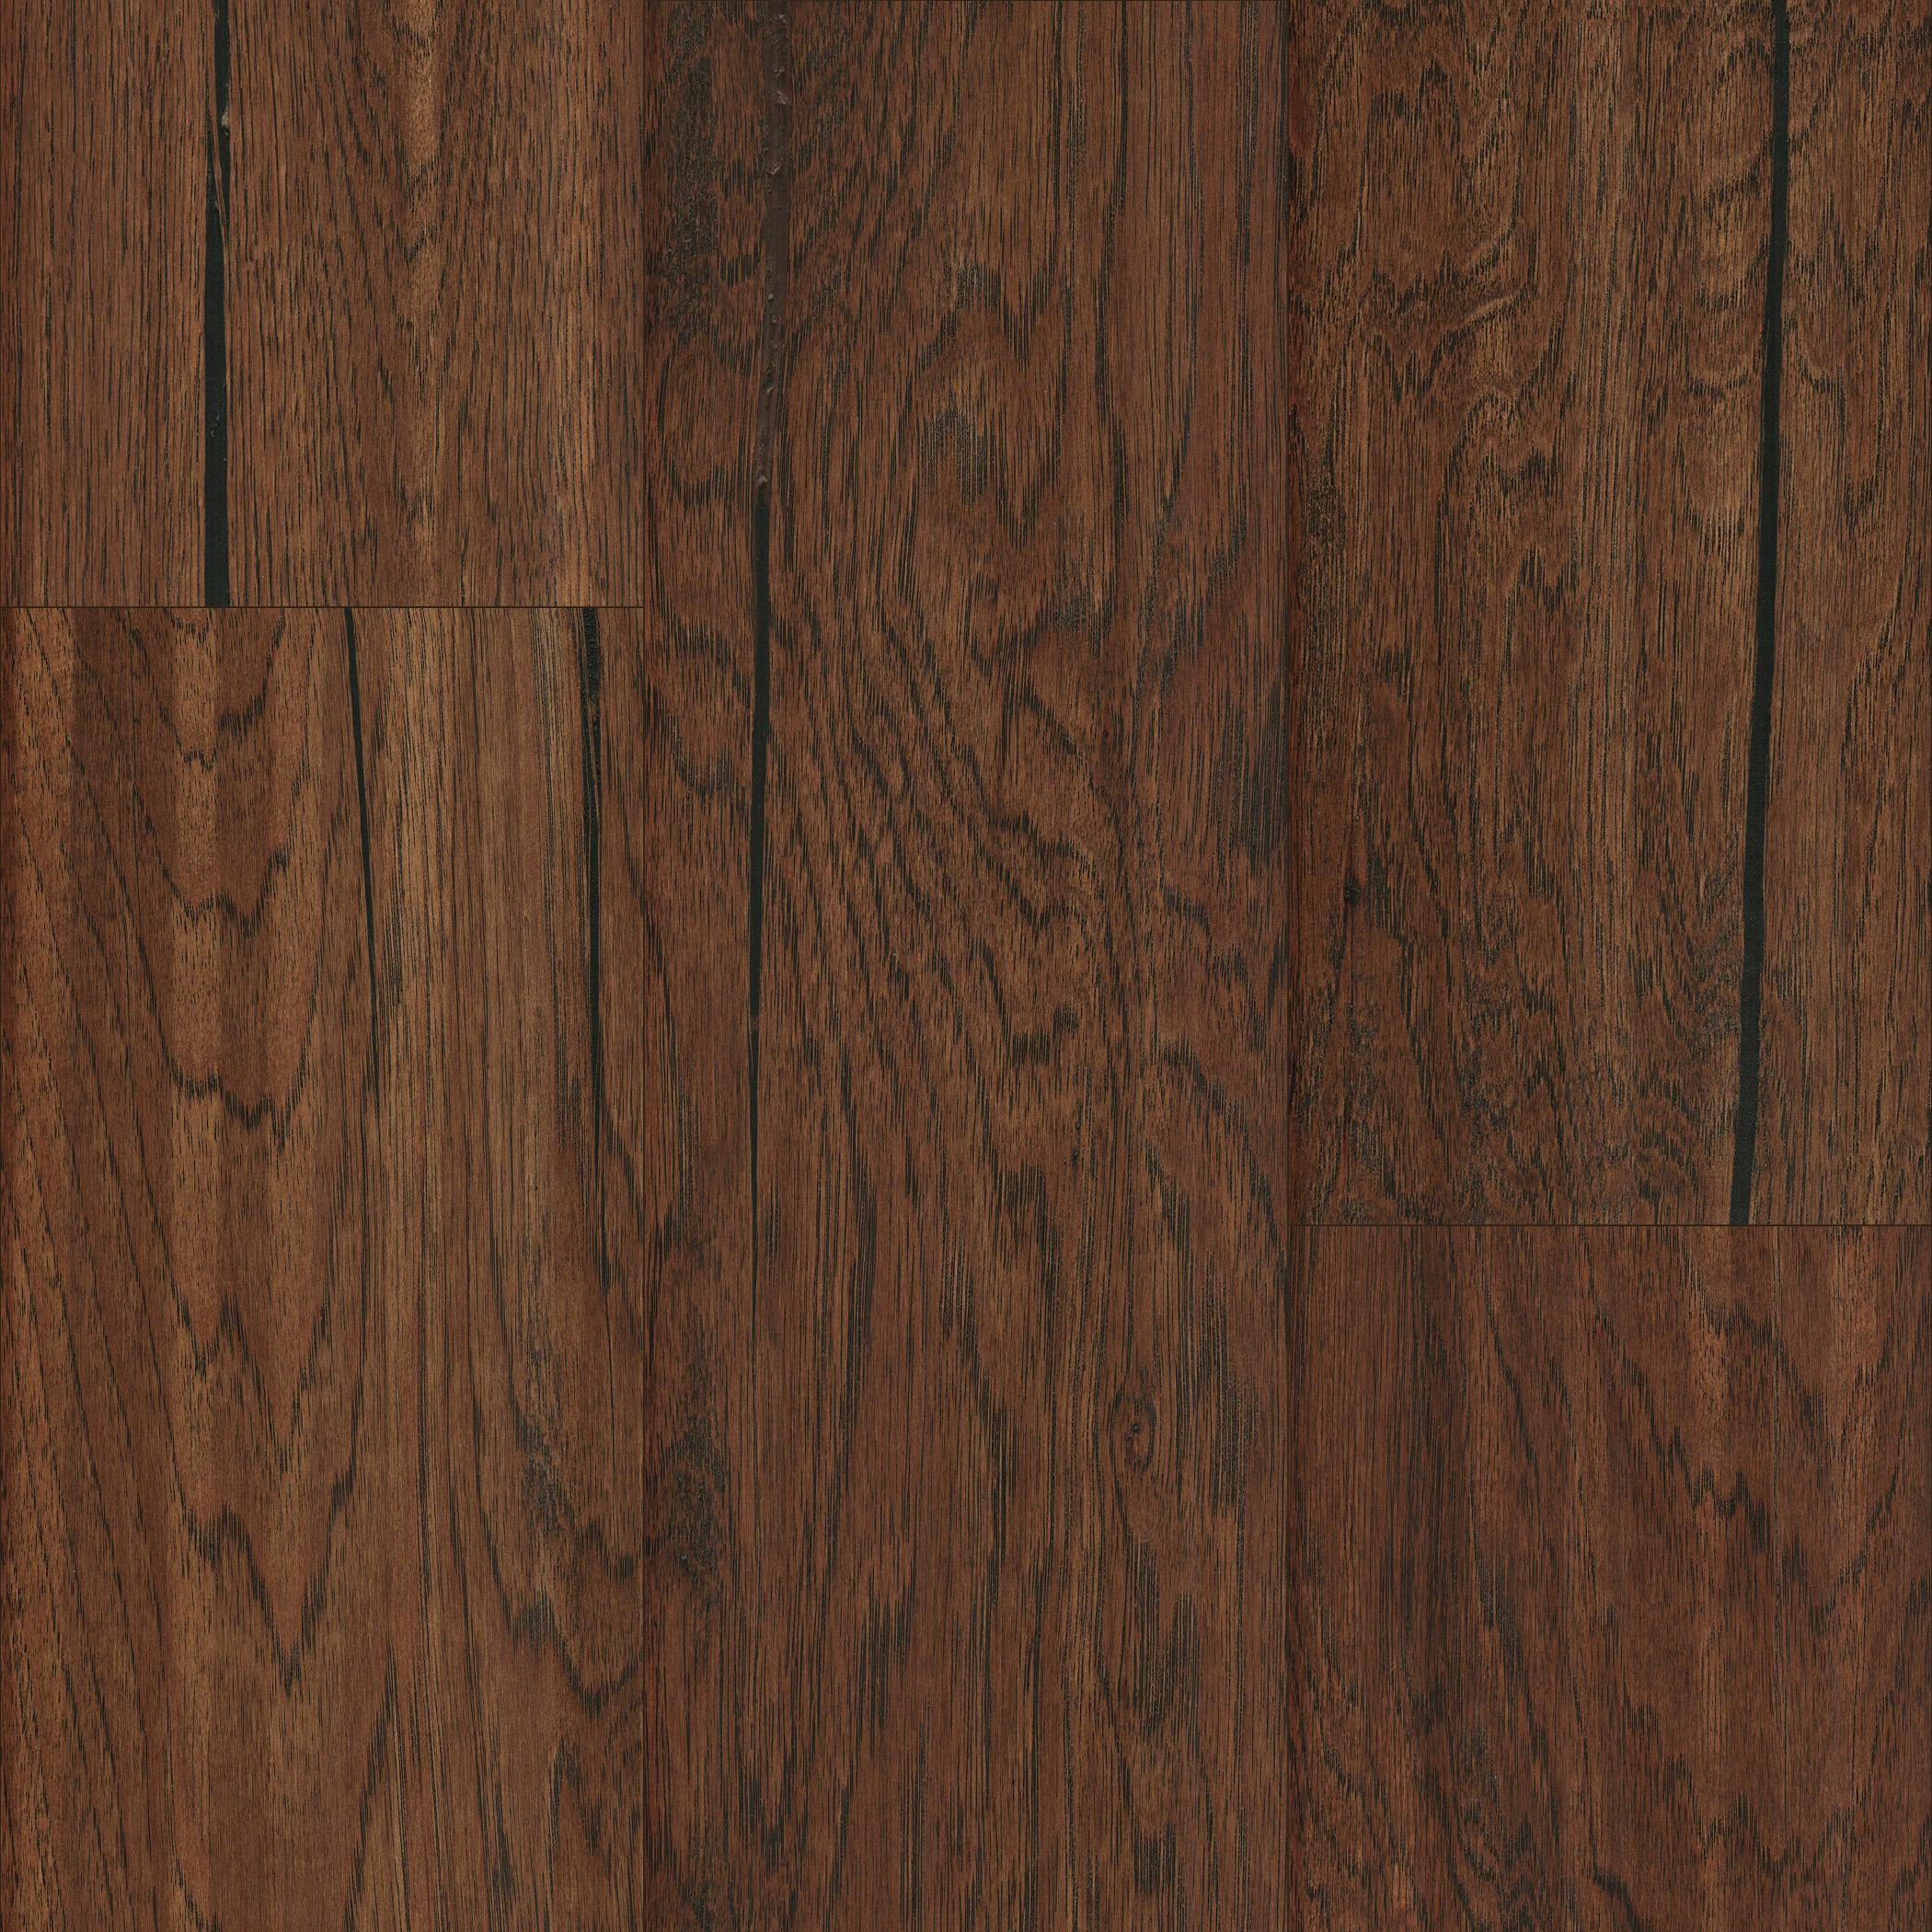 bruce unfinished hardwood flooring of mullican san marco hickory provincial 7 sculpted engineered intended for mullican san marco hickory provincial 7 sculpted engineered hardwood flooring